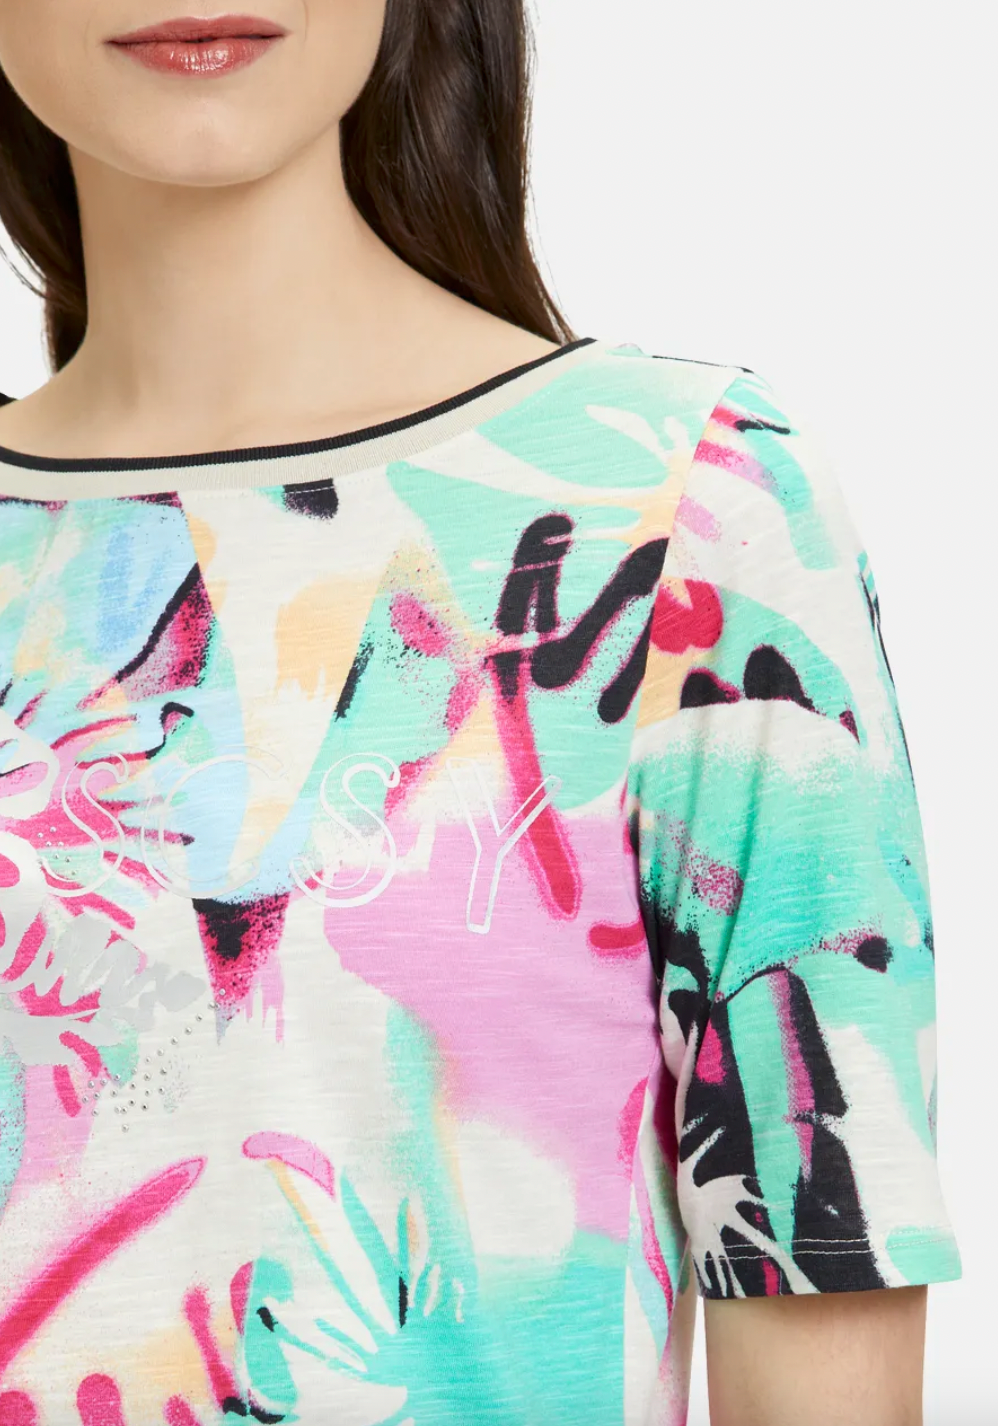 Multicoloured Tropical Print Top with Stud Detail